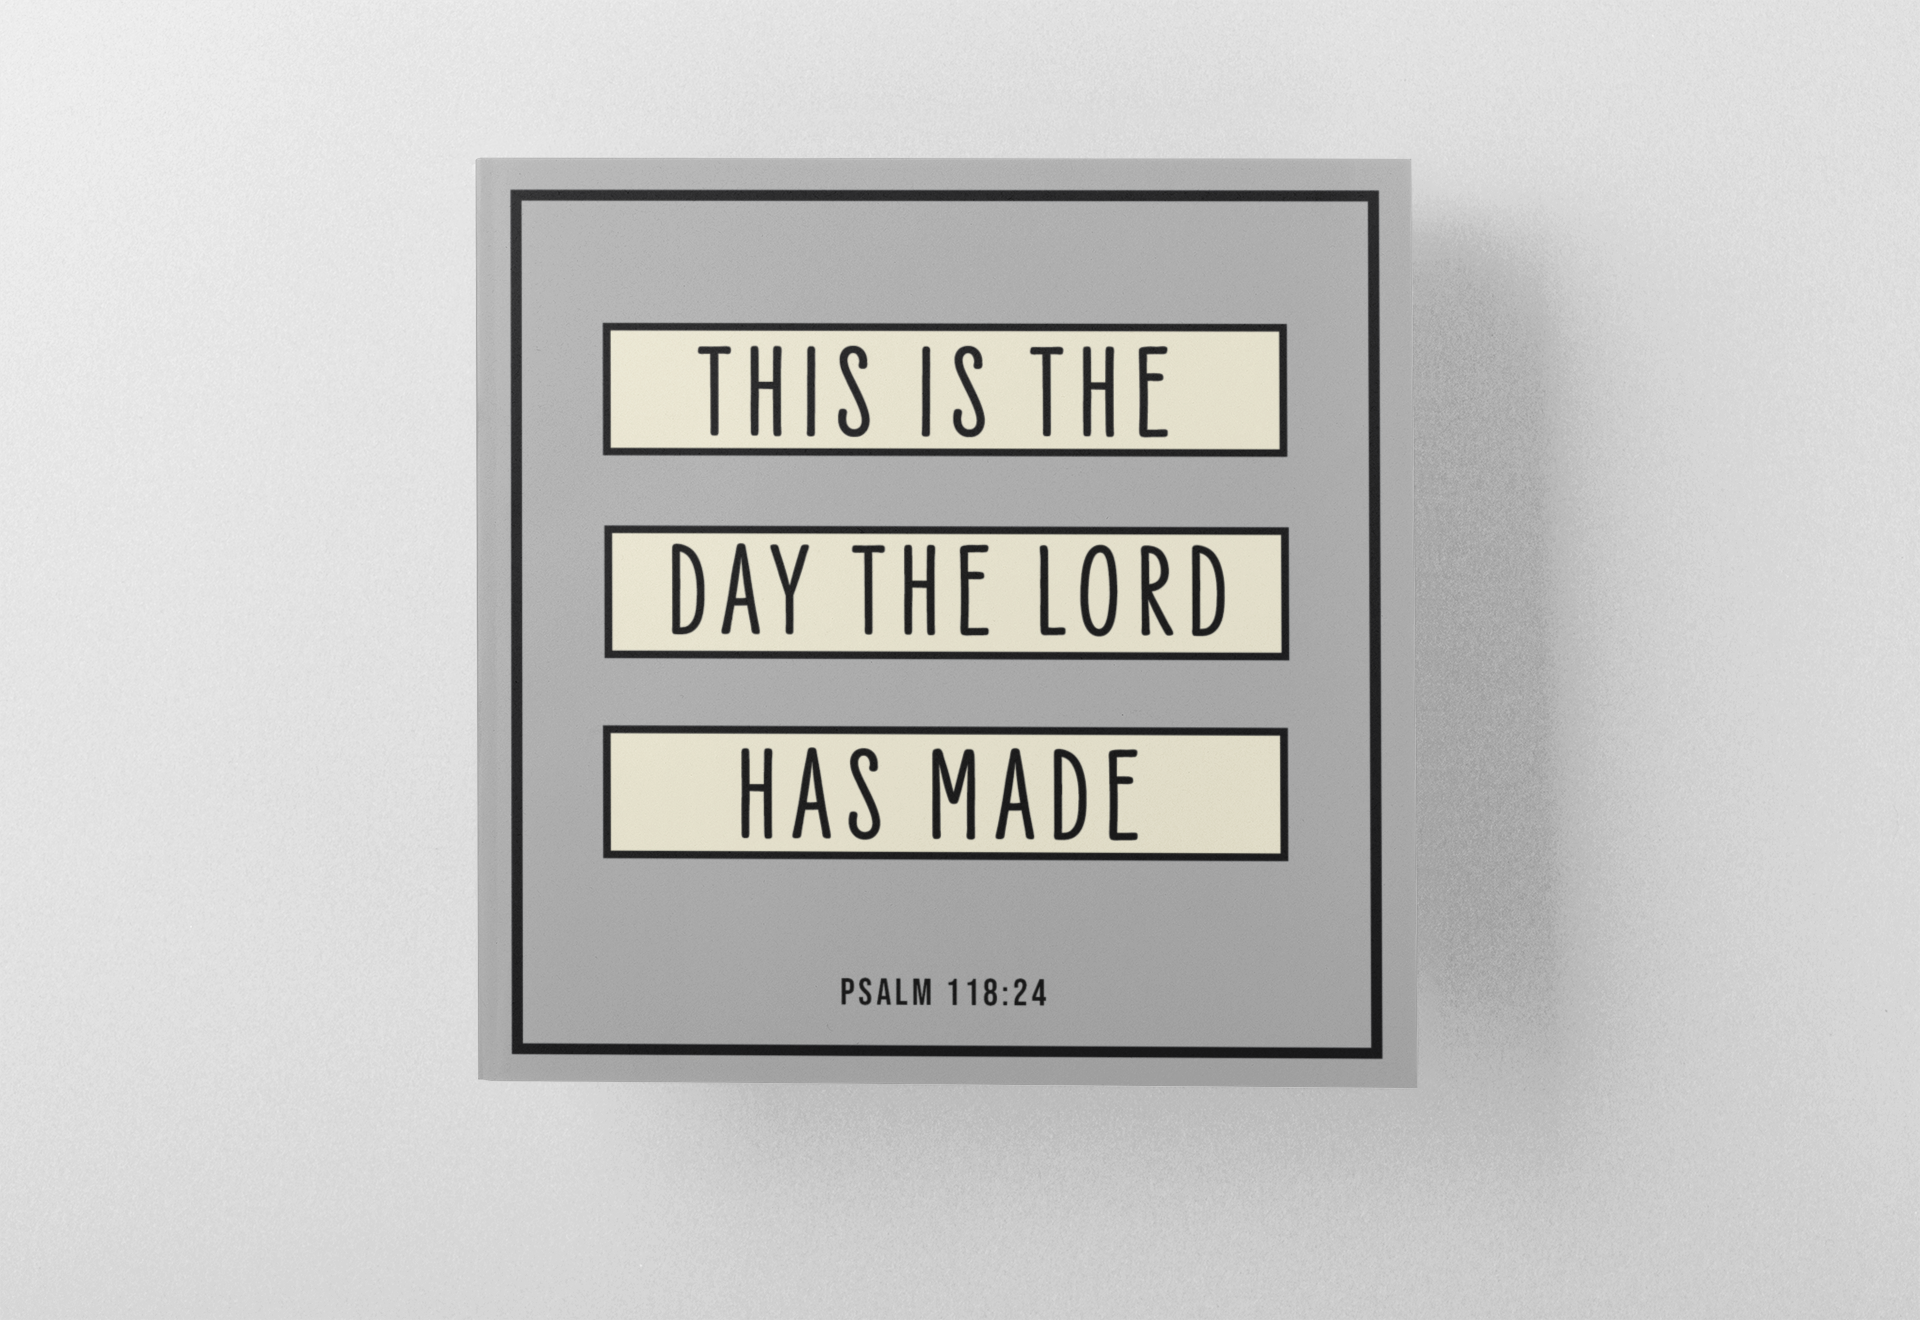 'This Is The Day The Lord Has Made' Greeting Card